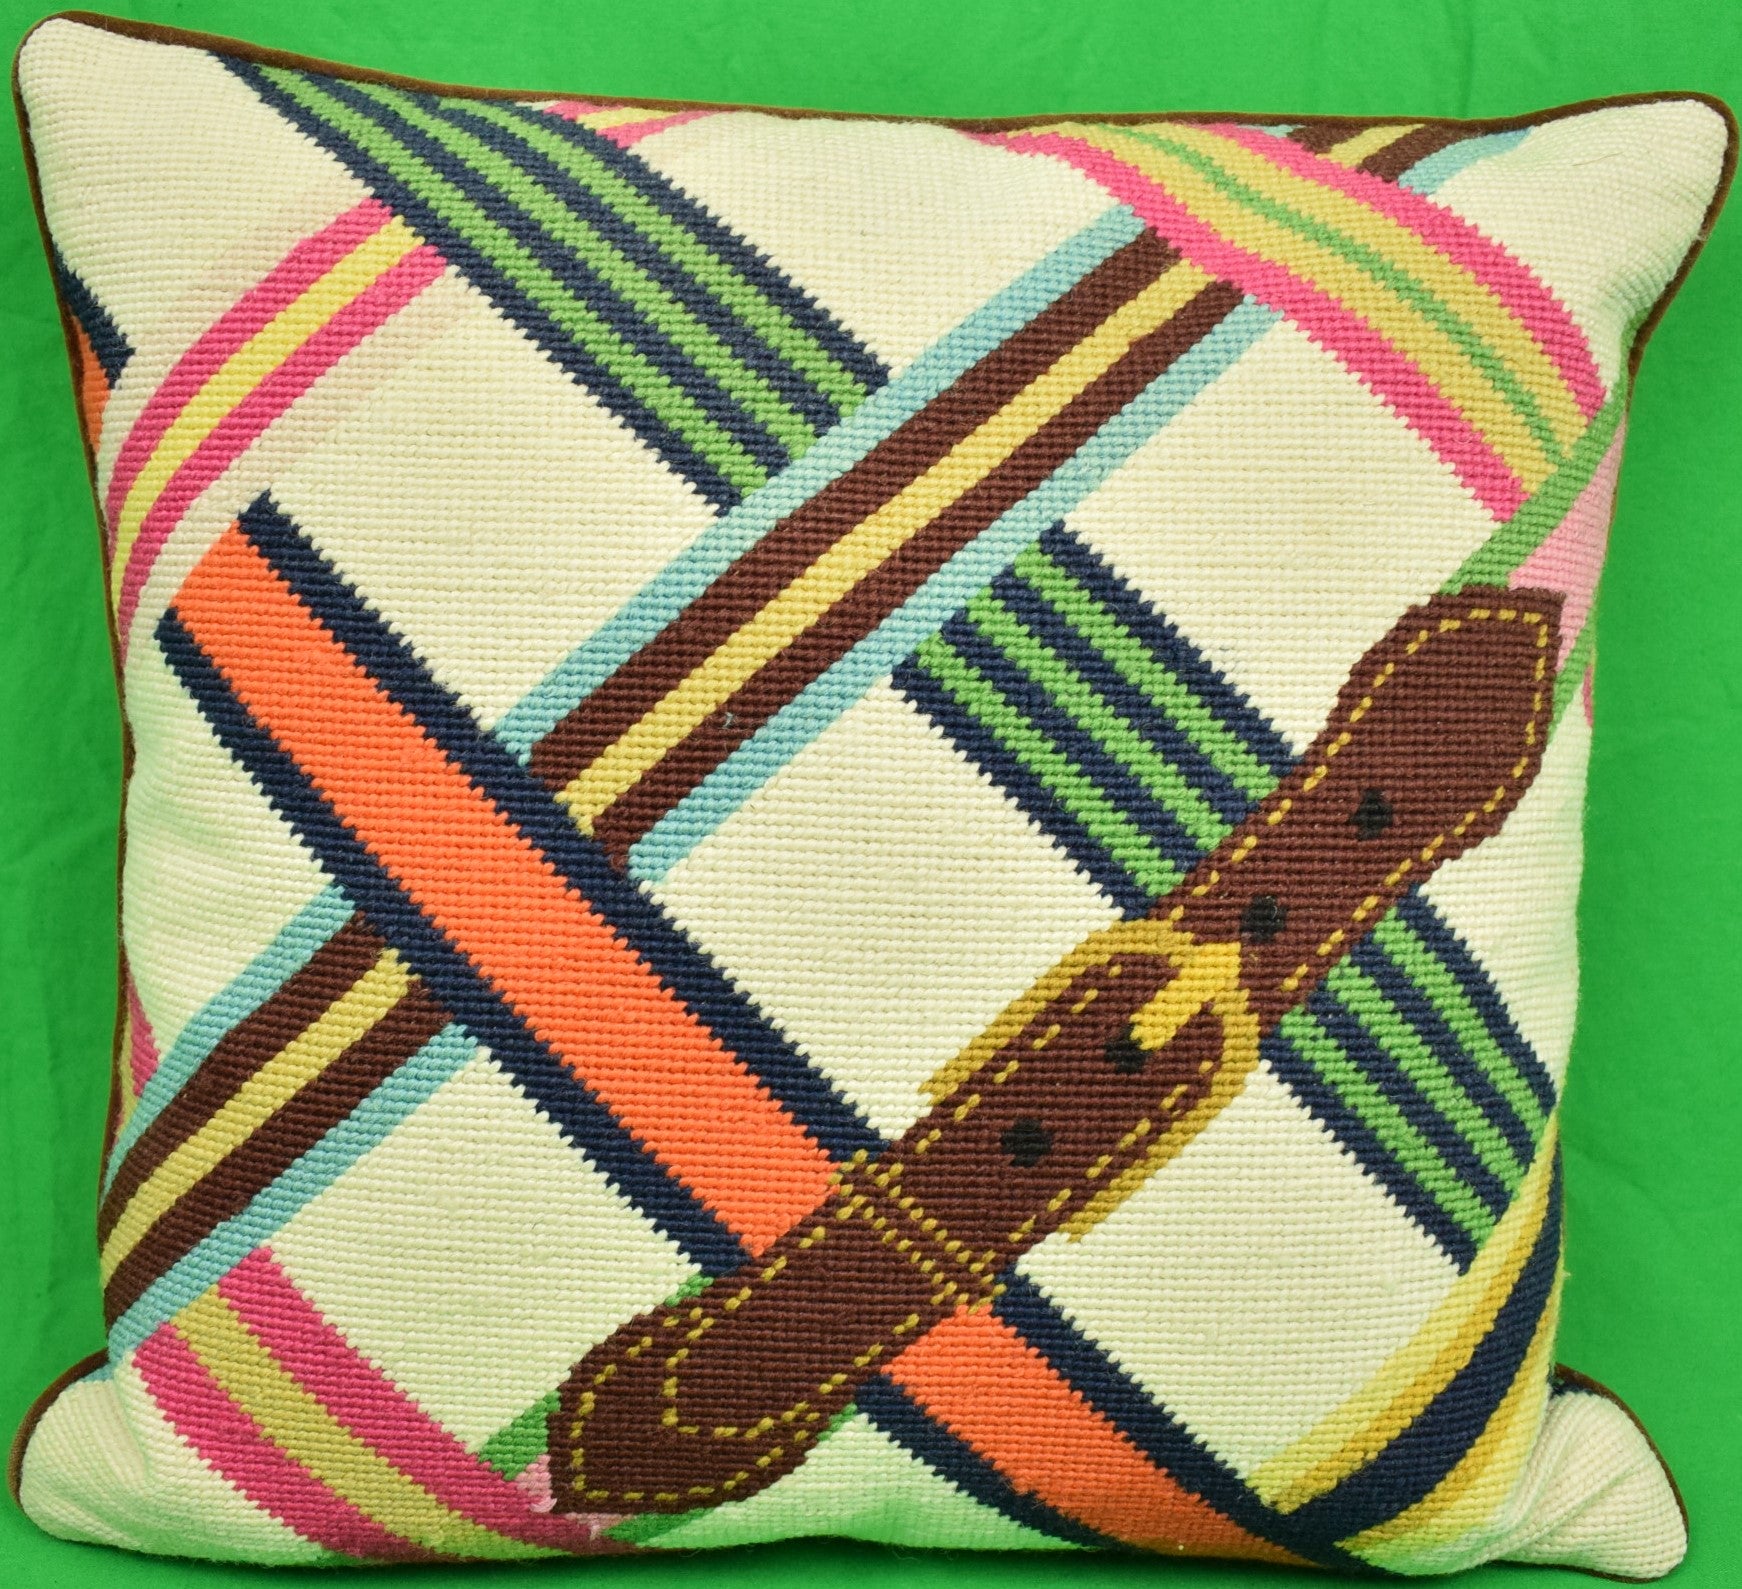 Diver Fly Petit Point Needlepoint Pillow (12 x 12) - Michaelian Home